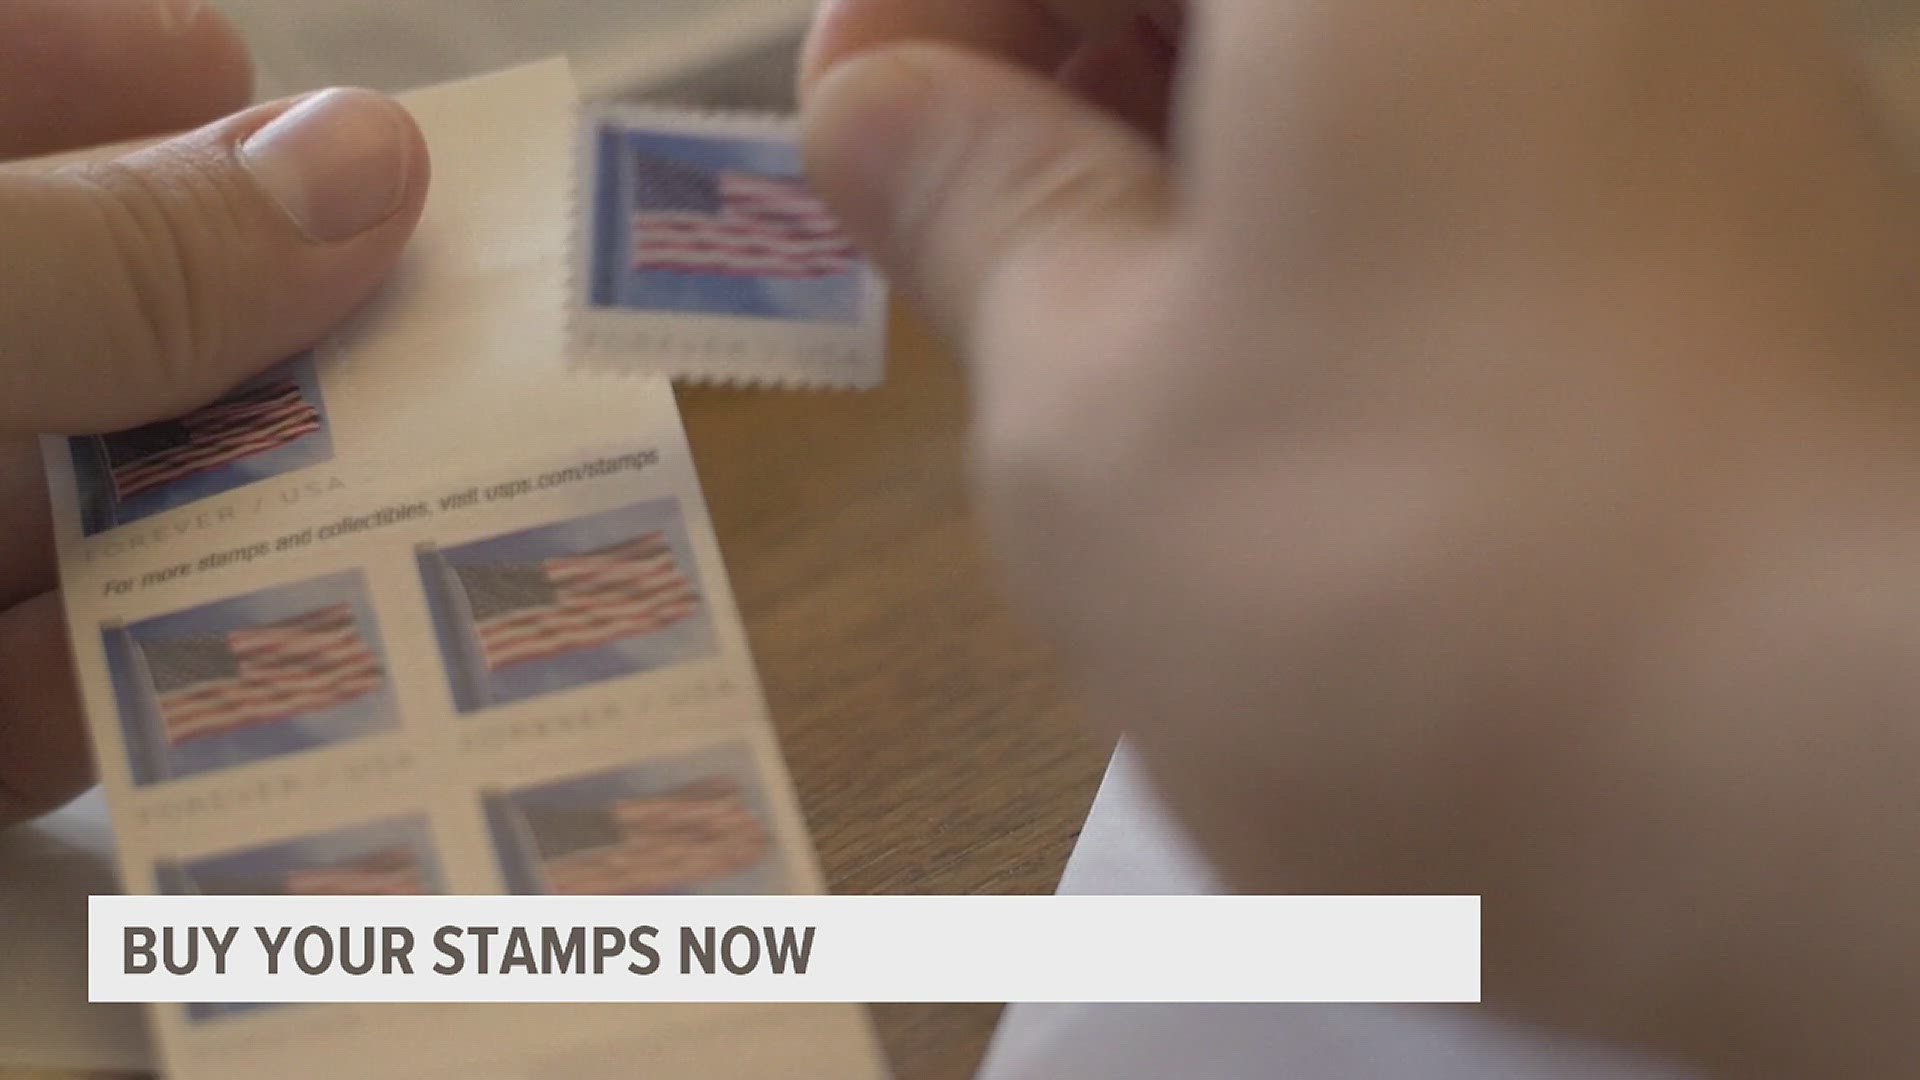 Forever stamps price to increase in 2023: Here's how much and when 